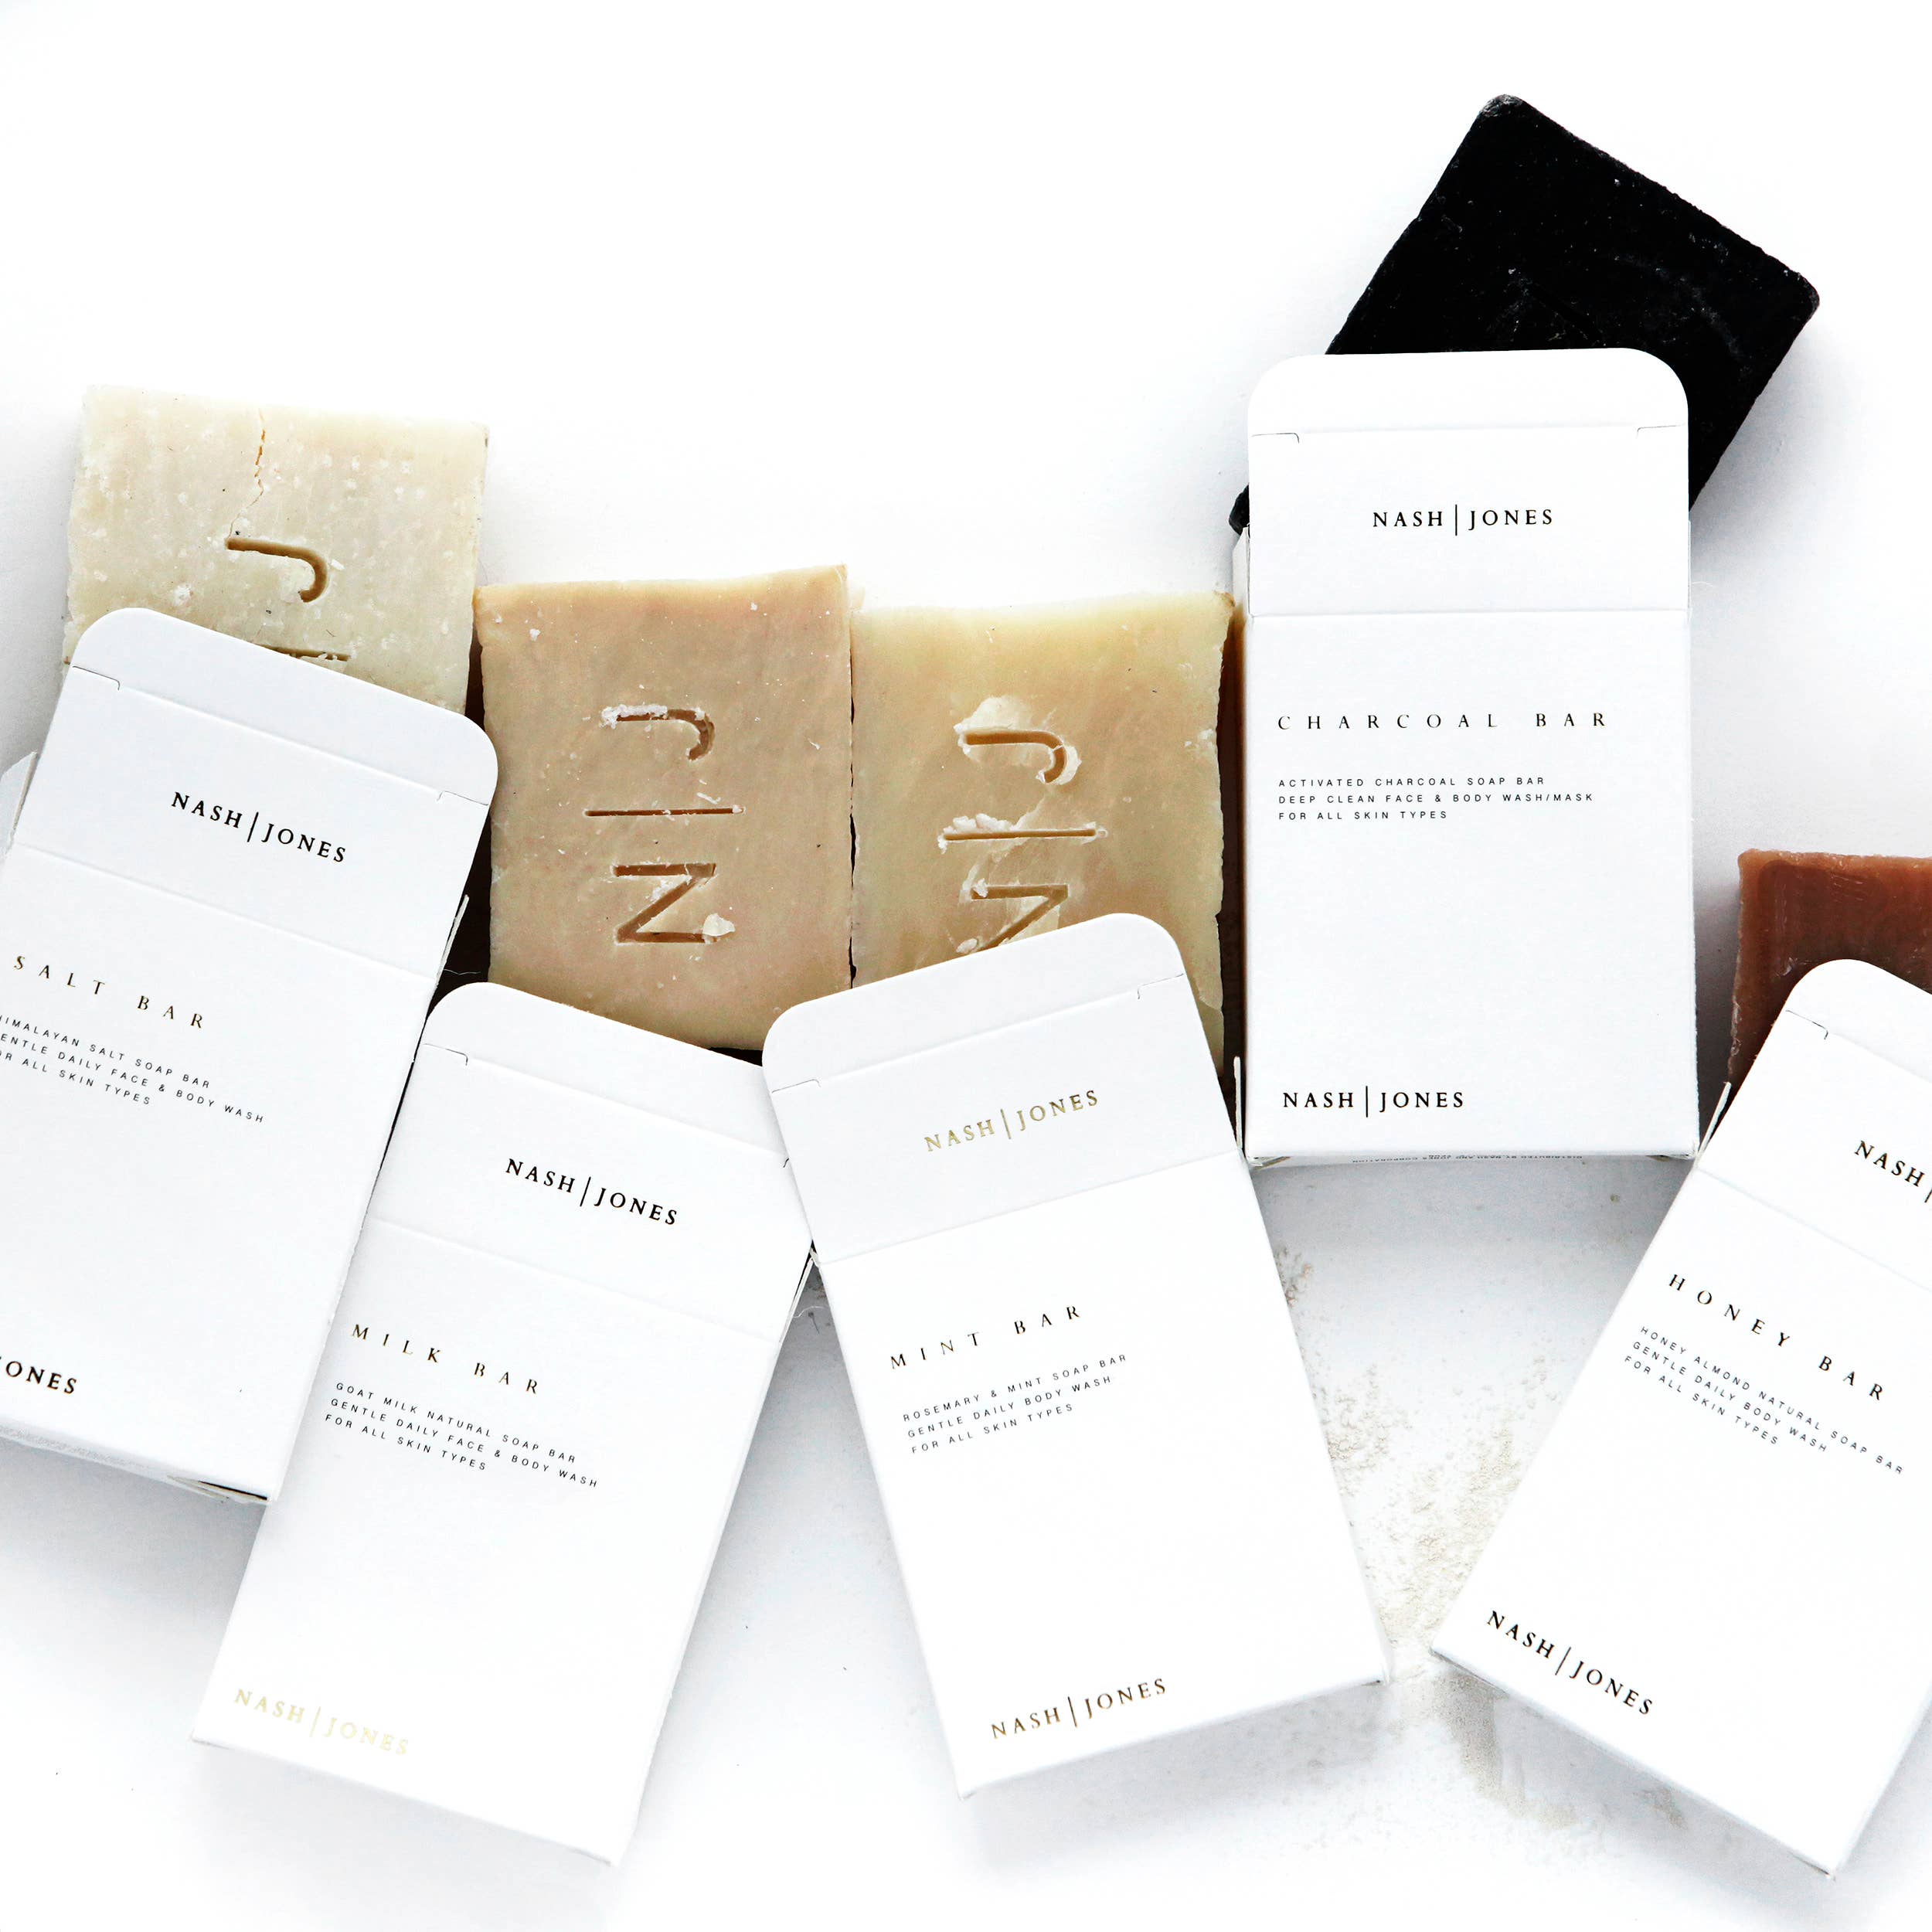 Cleansing Bars